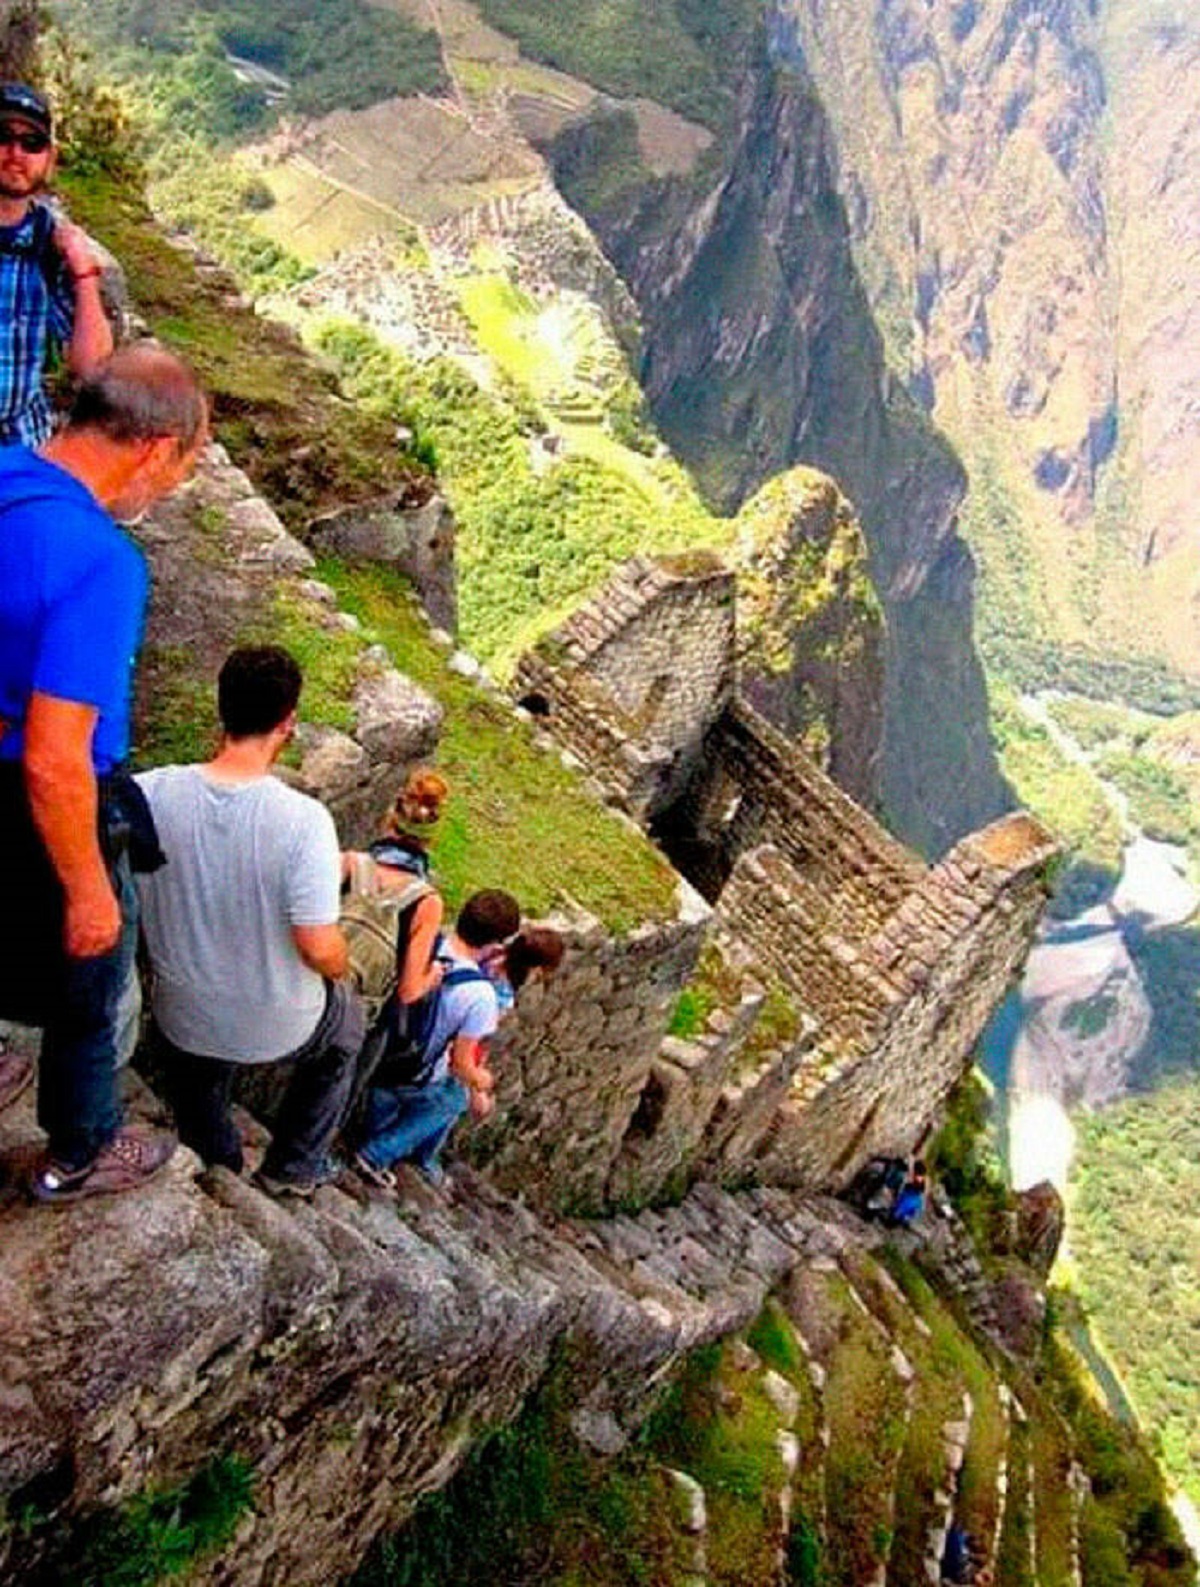 "“The Stairs Of Death” - Peru"